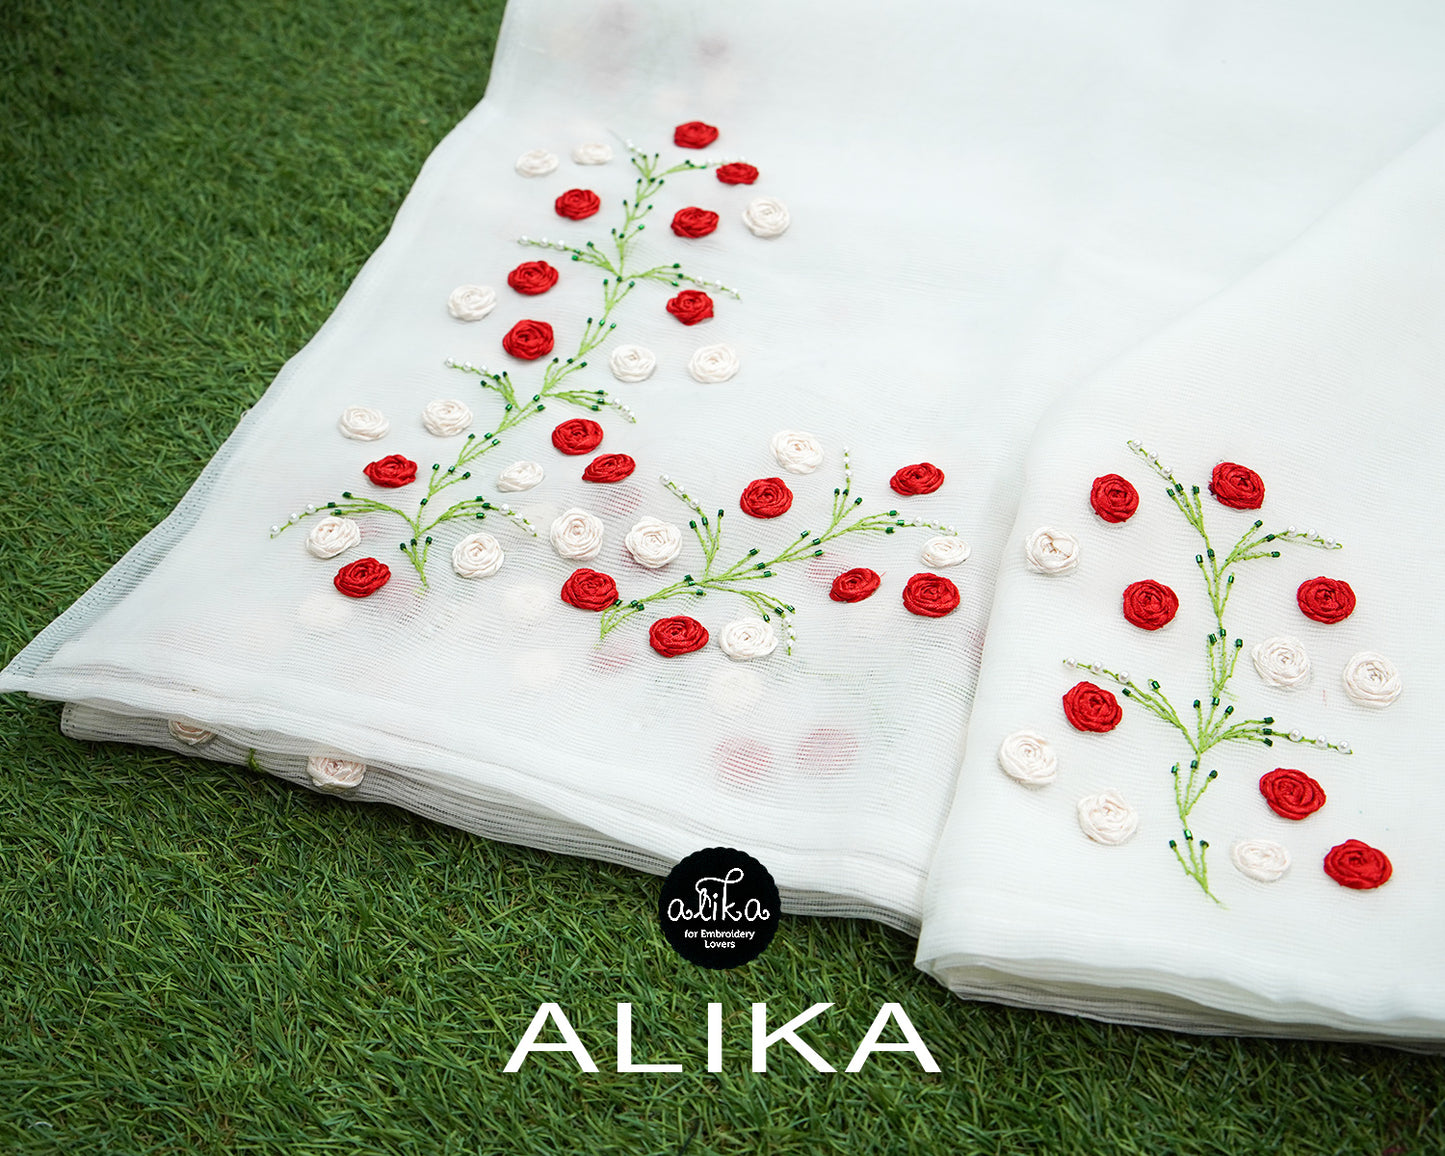 "Elegant White Kota Saree with Ribbon Embroidery Bunches - Adorned with White and Red Floral Accents"